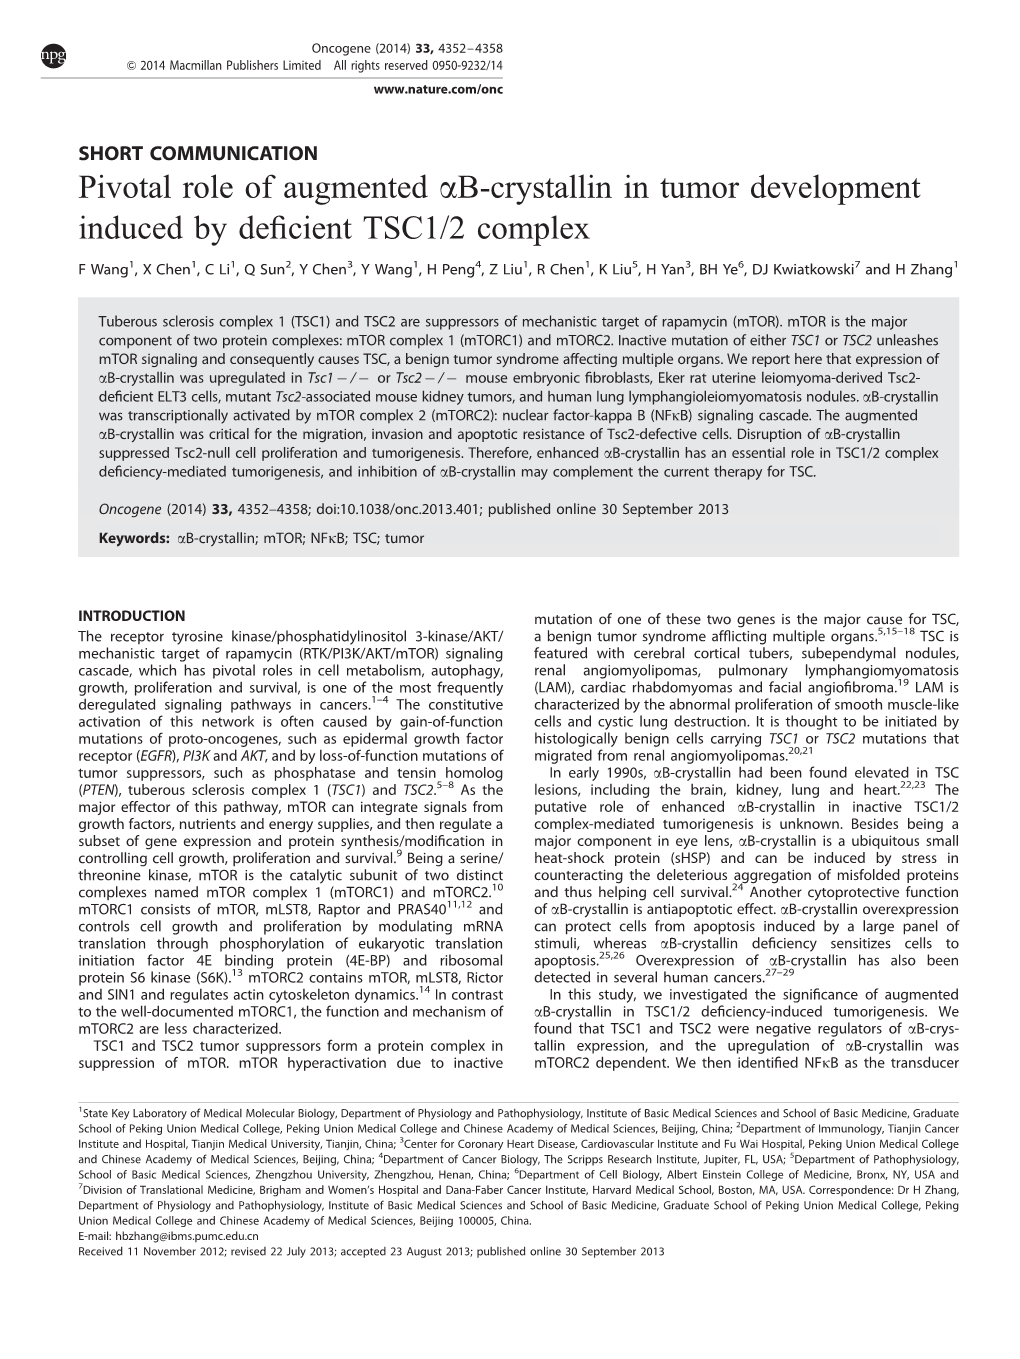 B-Crystallin in Tumor Development Induced by Deficient TSC1&Sol